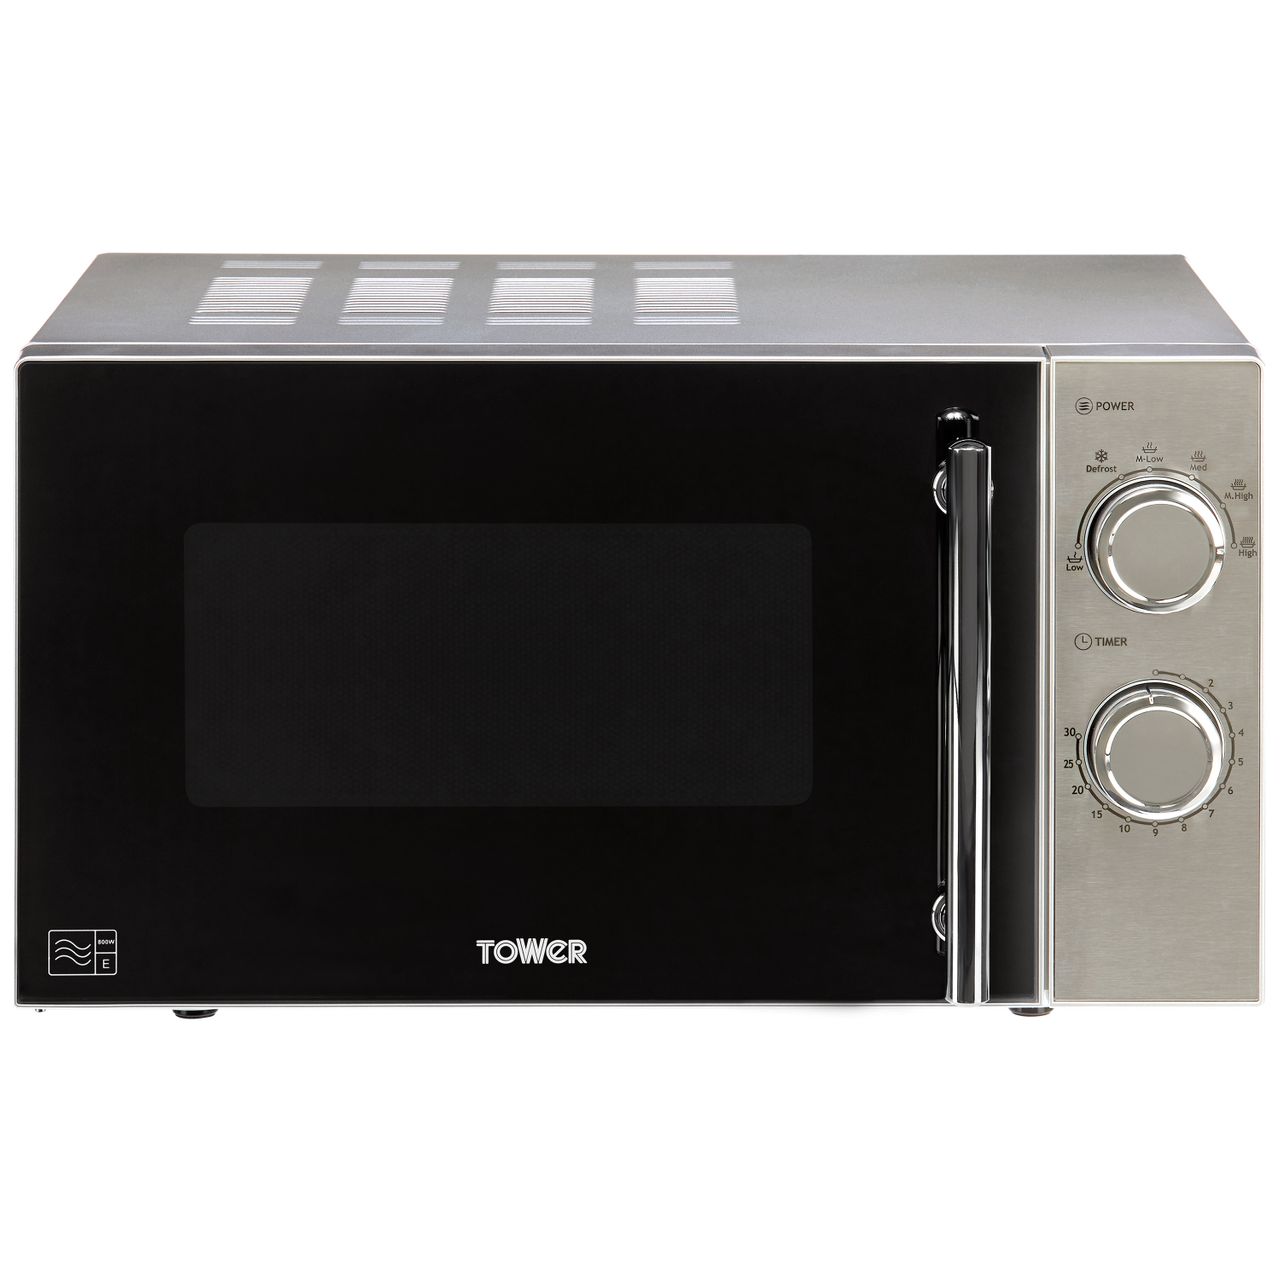 Tower T24015S 20 Litre Microwave Review